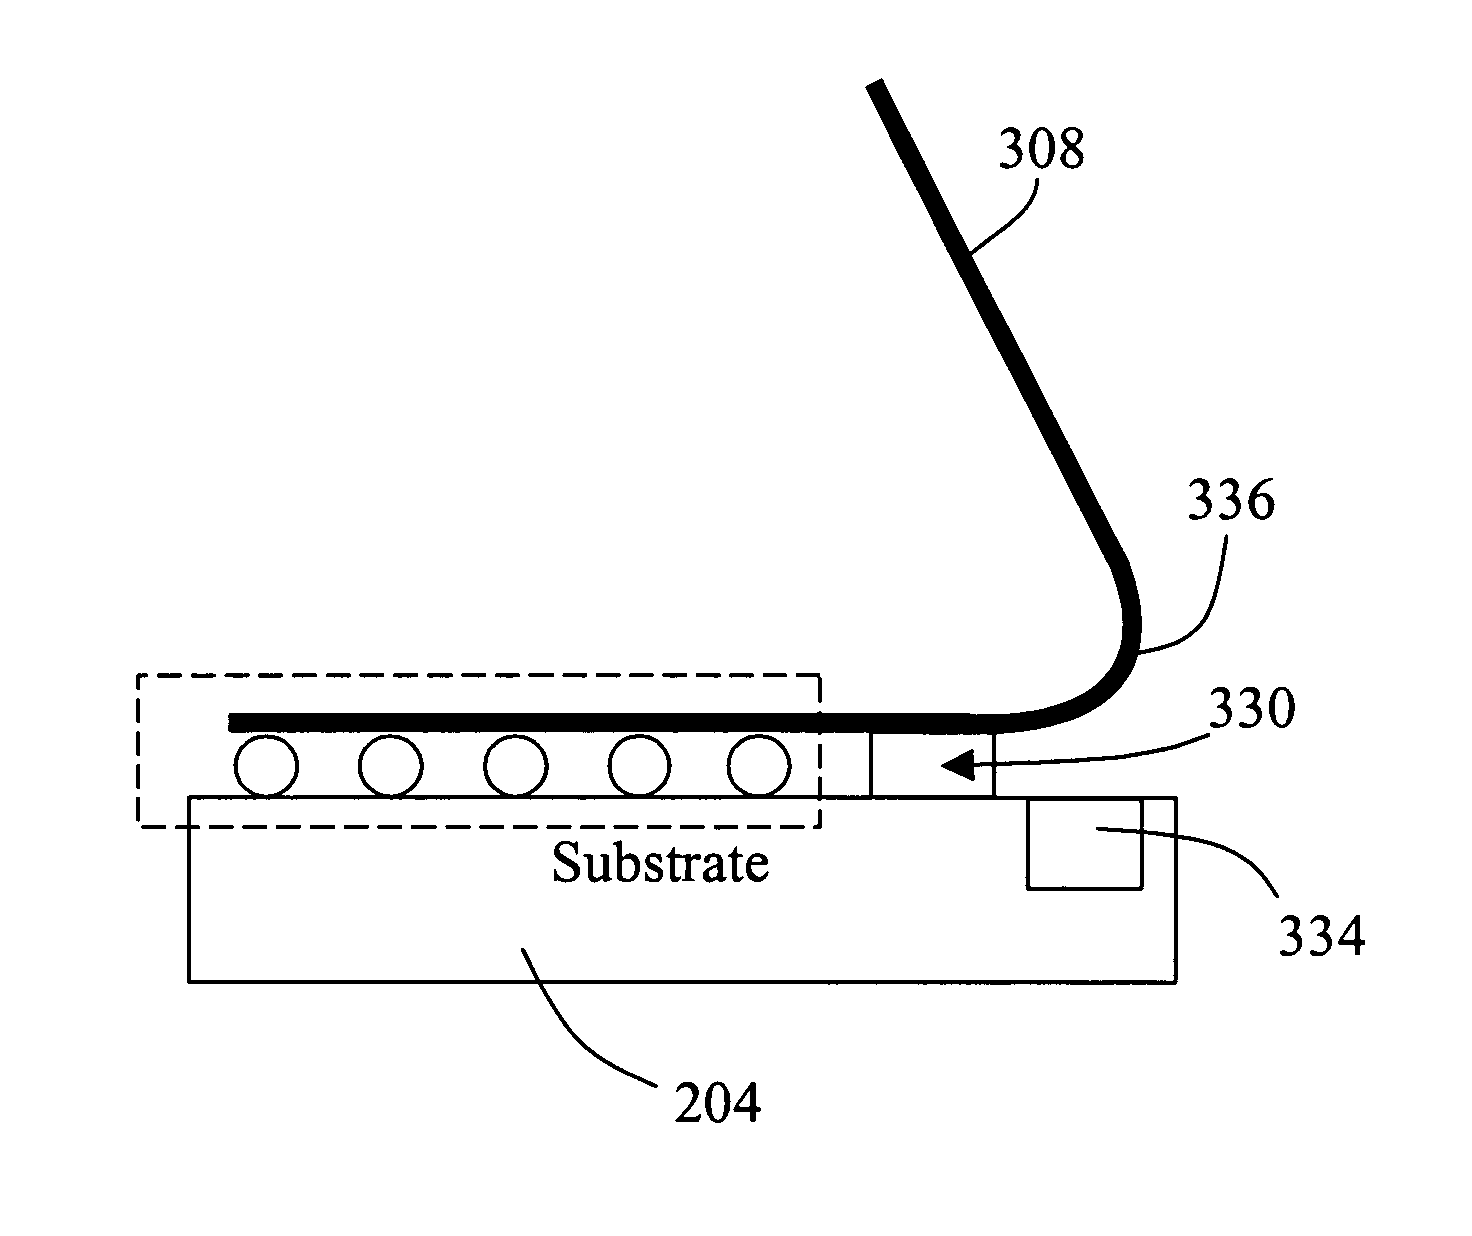 Module assembly for multiple die back-illuminated diode